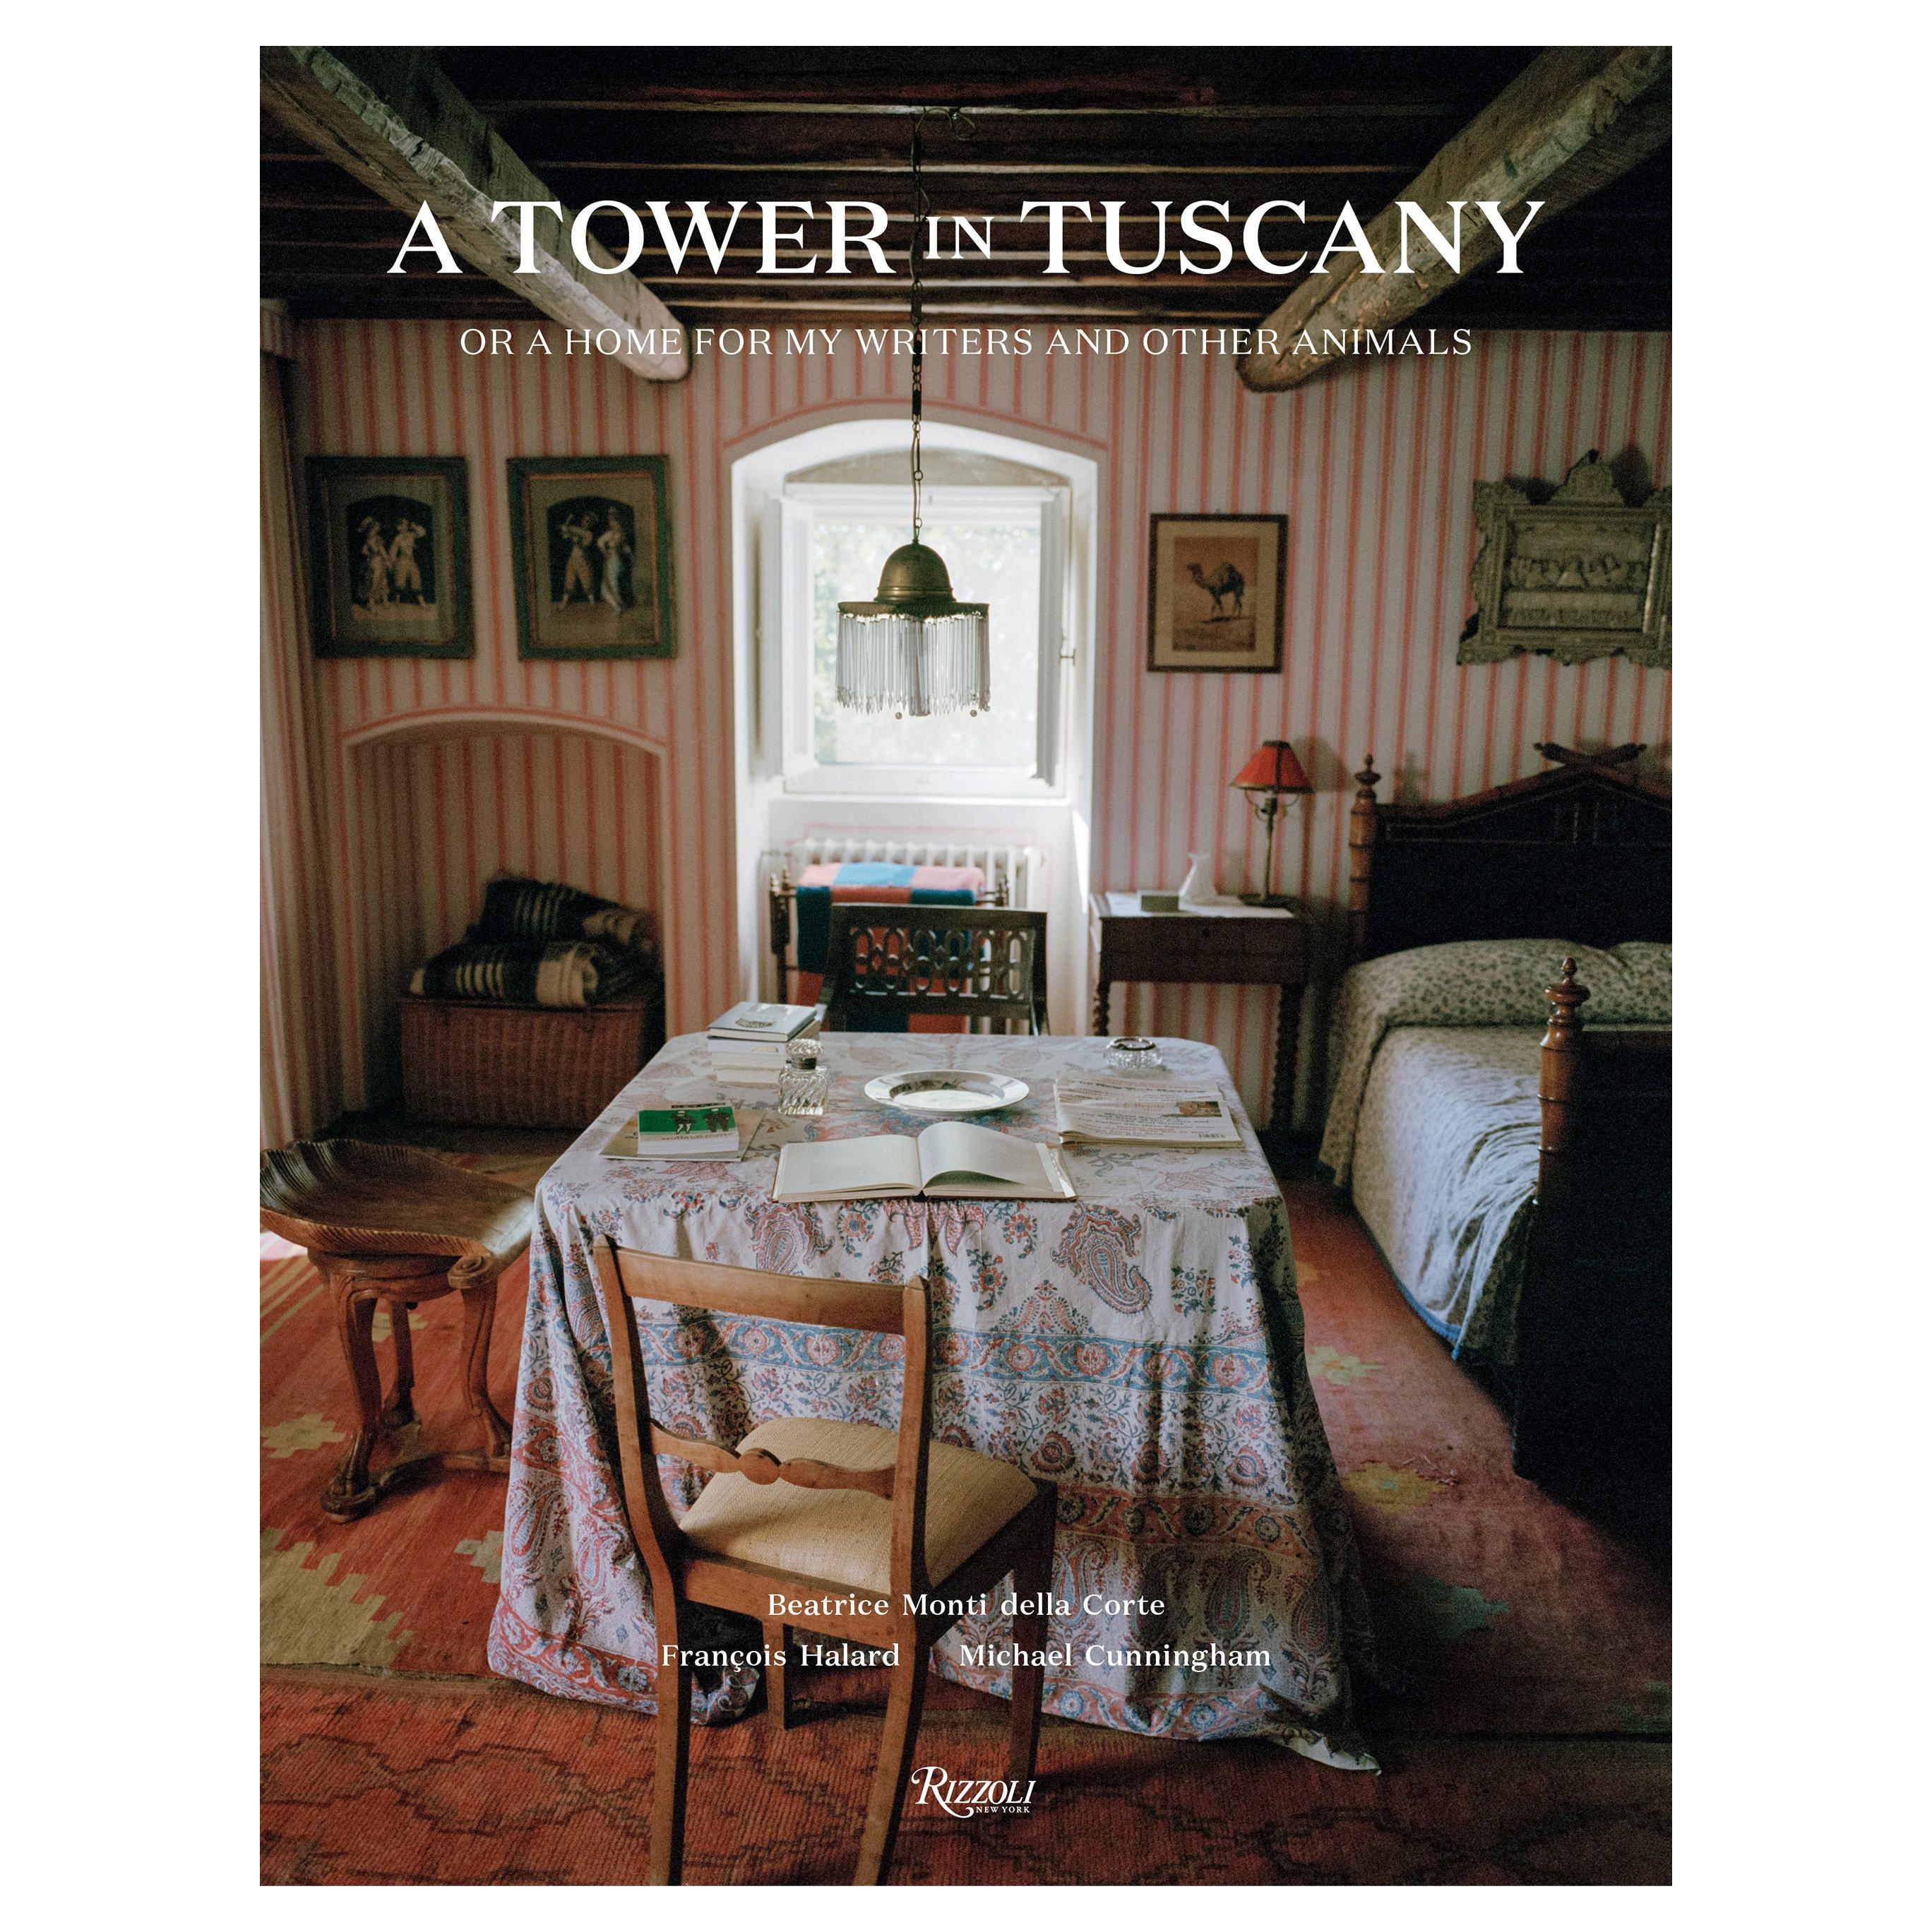 A Tower in Tuscany Or a Home for My Writers and Other Animals (une tour en Toscane)